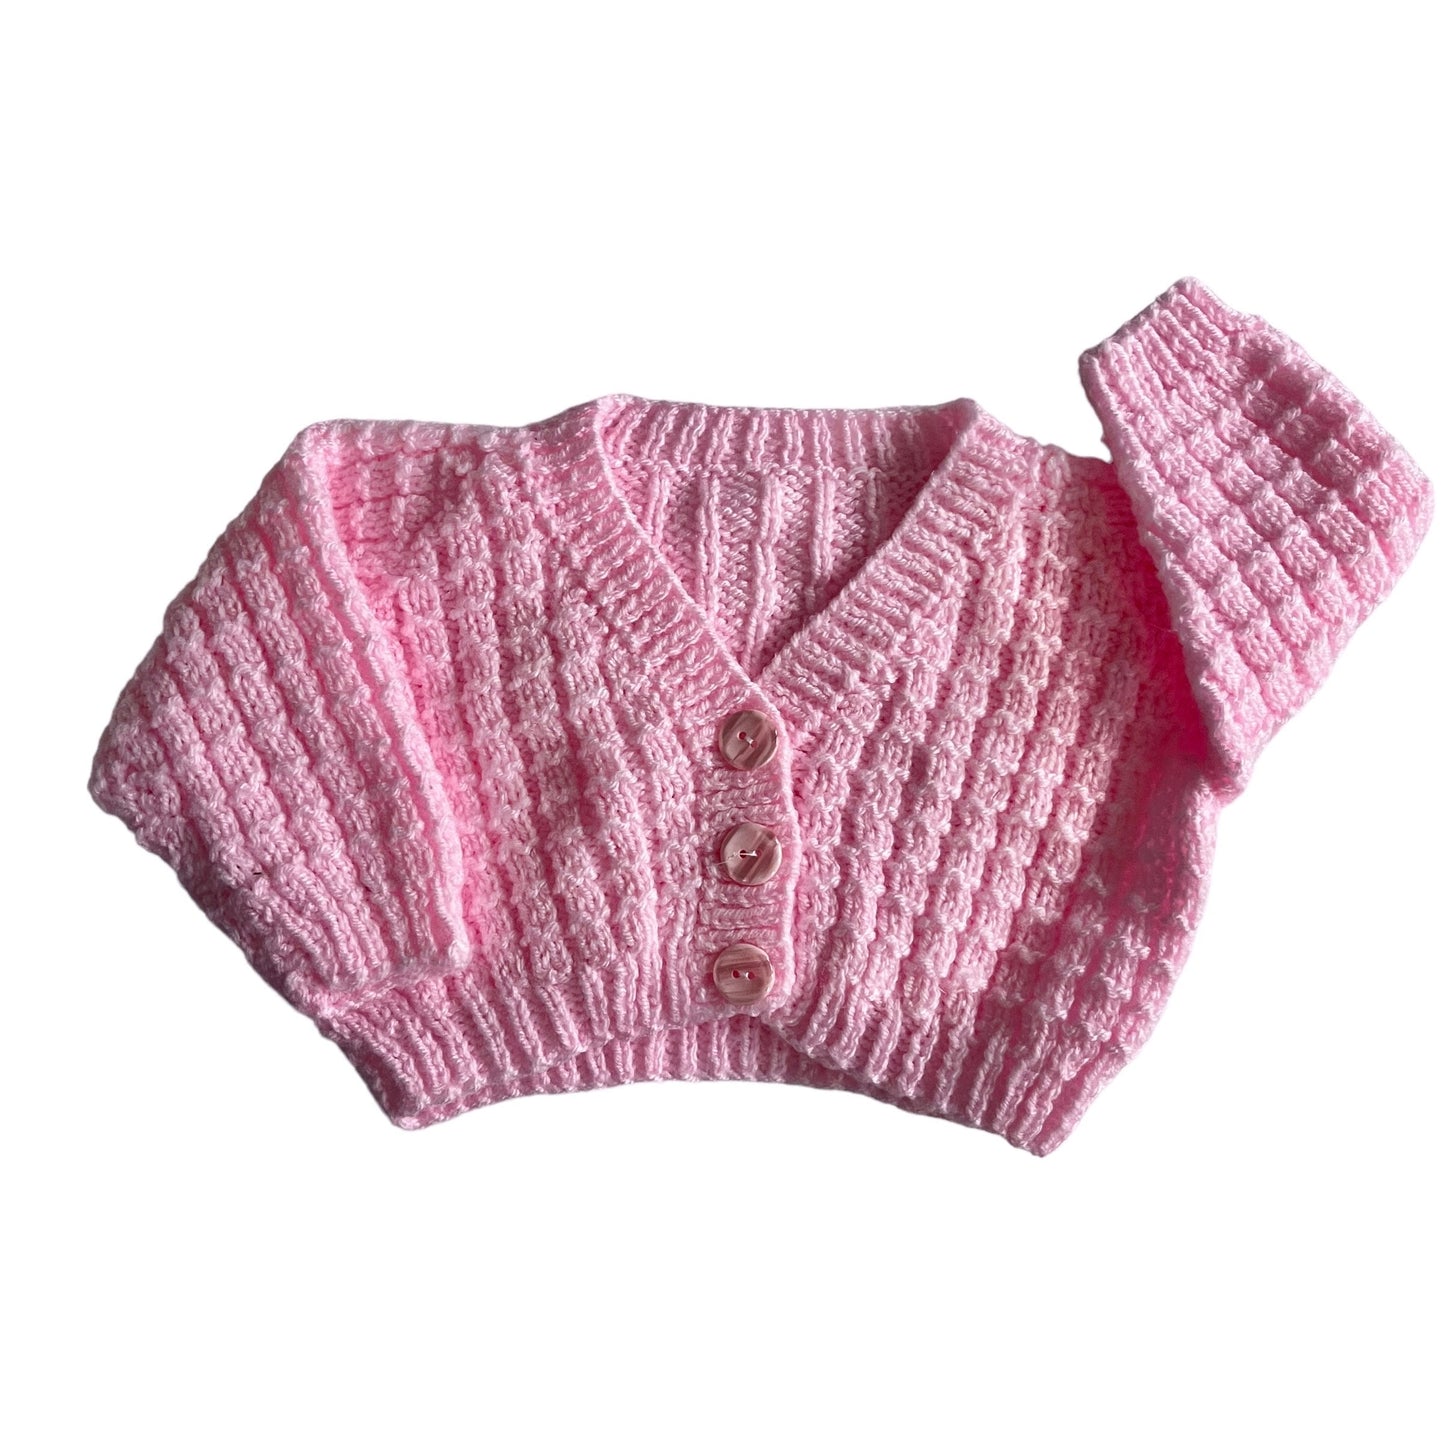 Vintage Pink Knitted Cardigan 0-6 Months